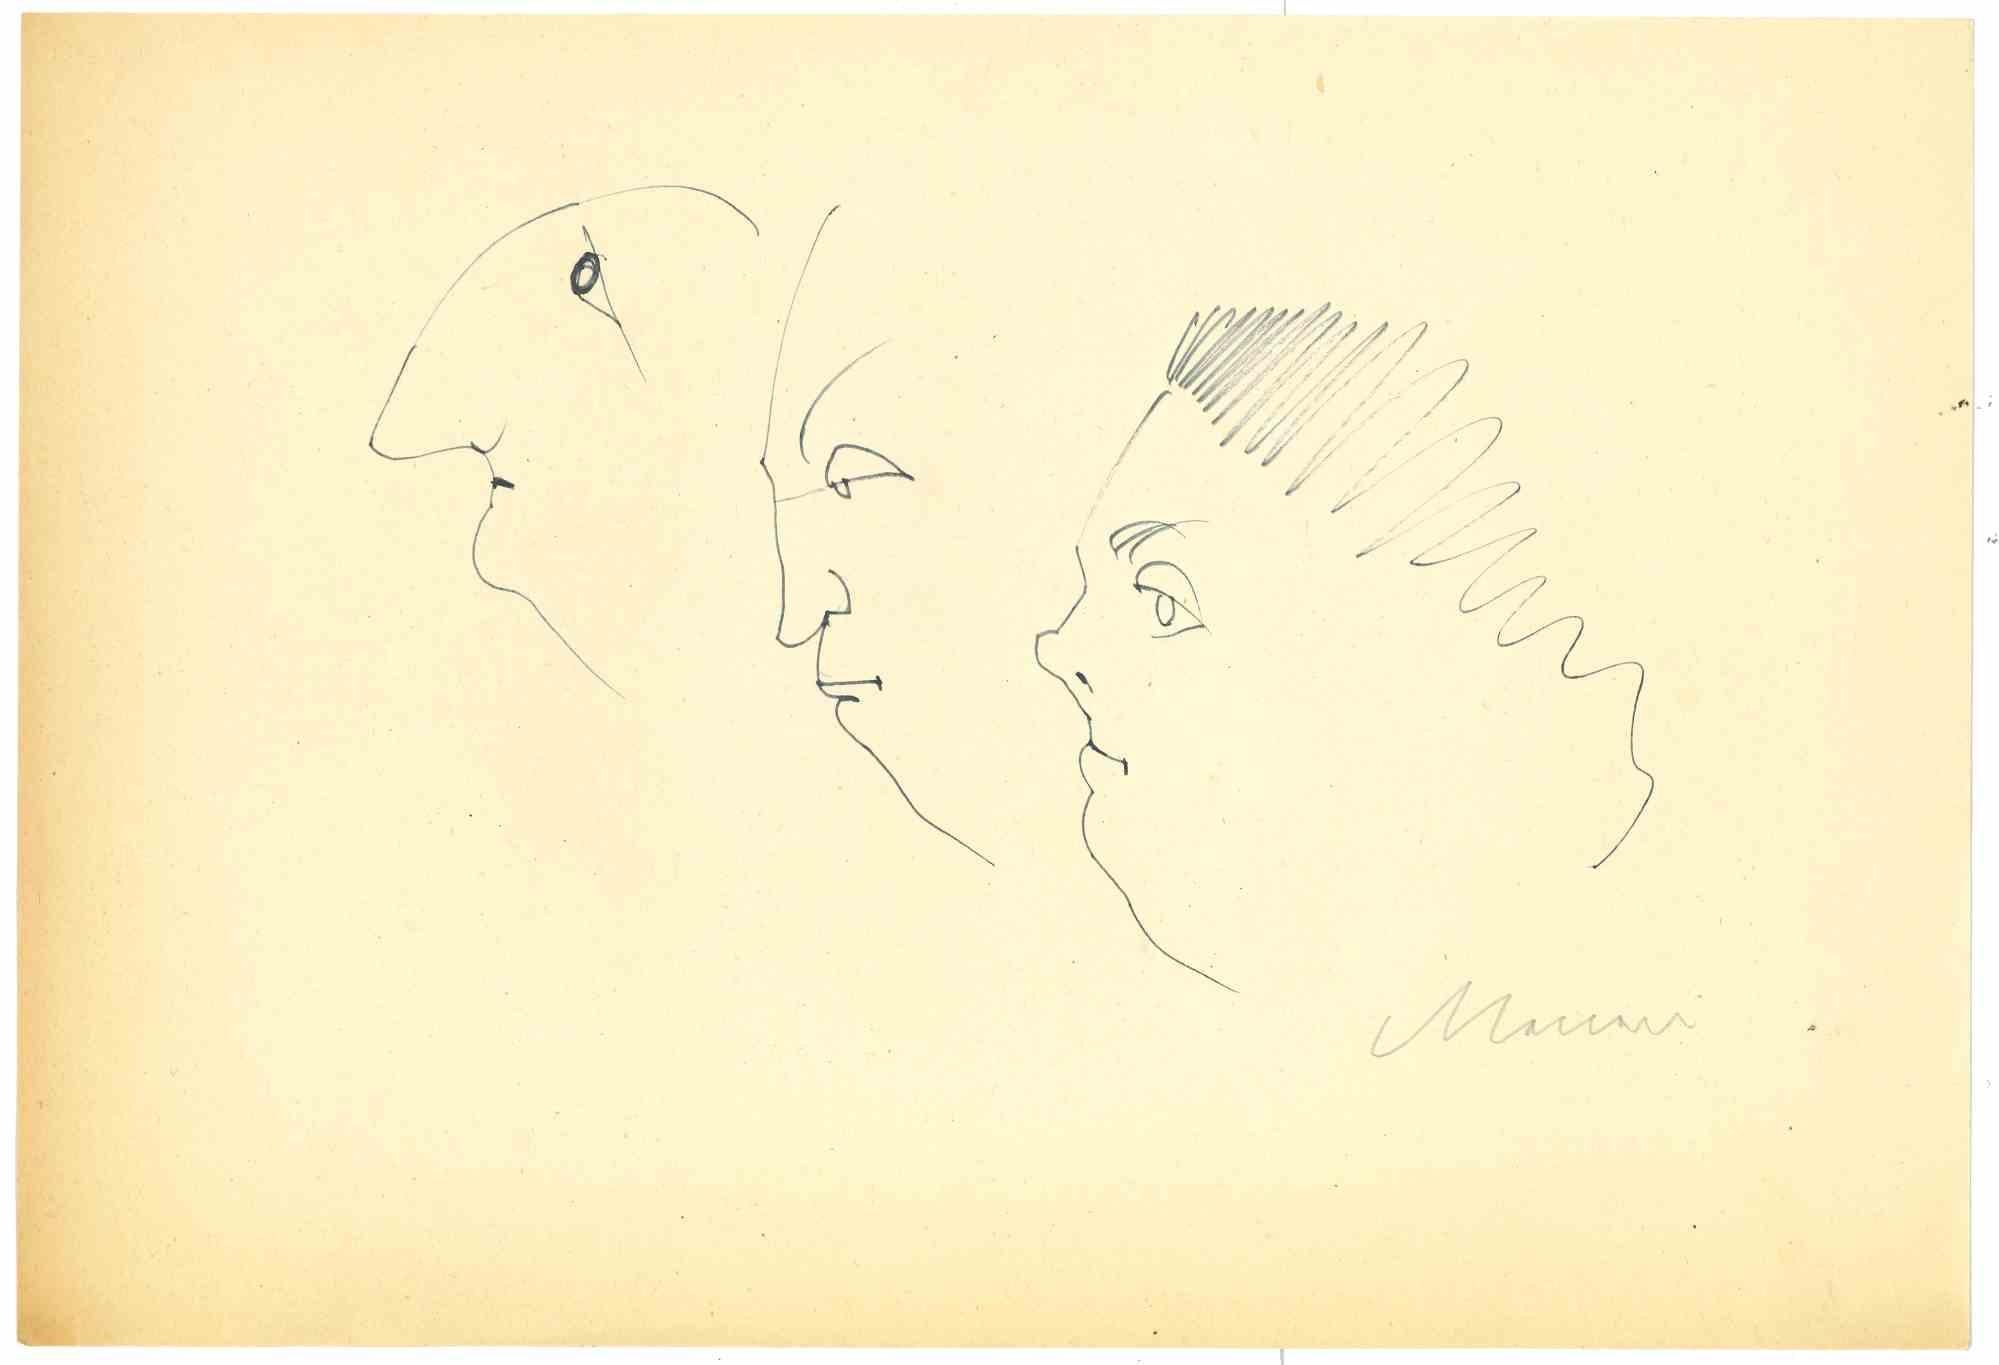 Profiles is a Pen Drawing realized by Mino Maccari  (1924-1989) in the 1960s.

Hand-signed on the lower.

Good condition.

Mino Maccari (Siena, 1924-Rome, June 16, 1989) was an Italian writer, painter, engraver and journalist, winner of the